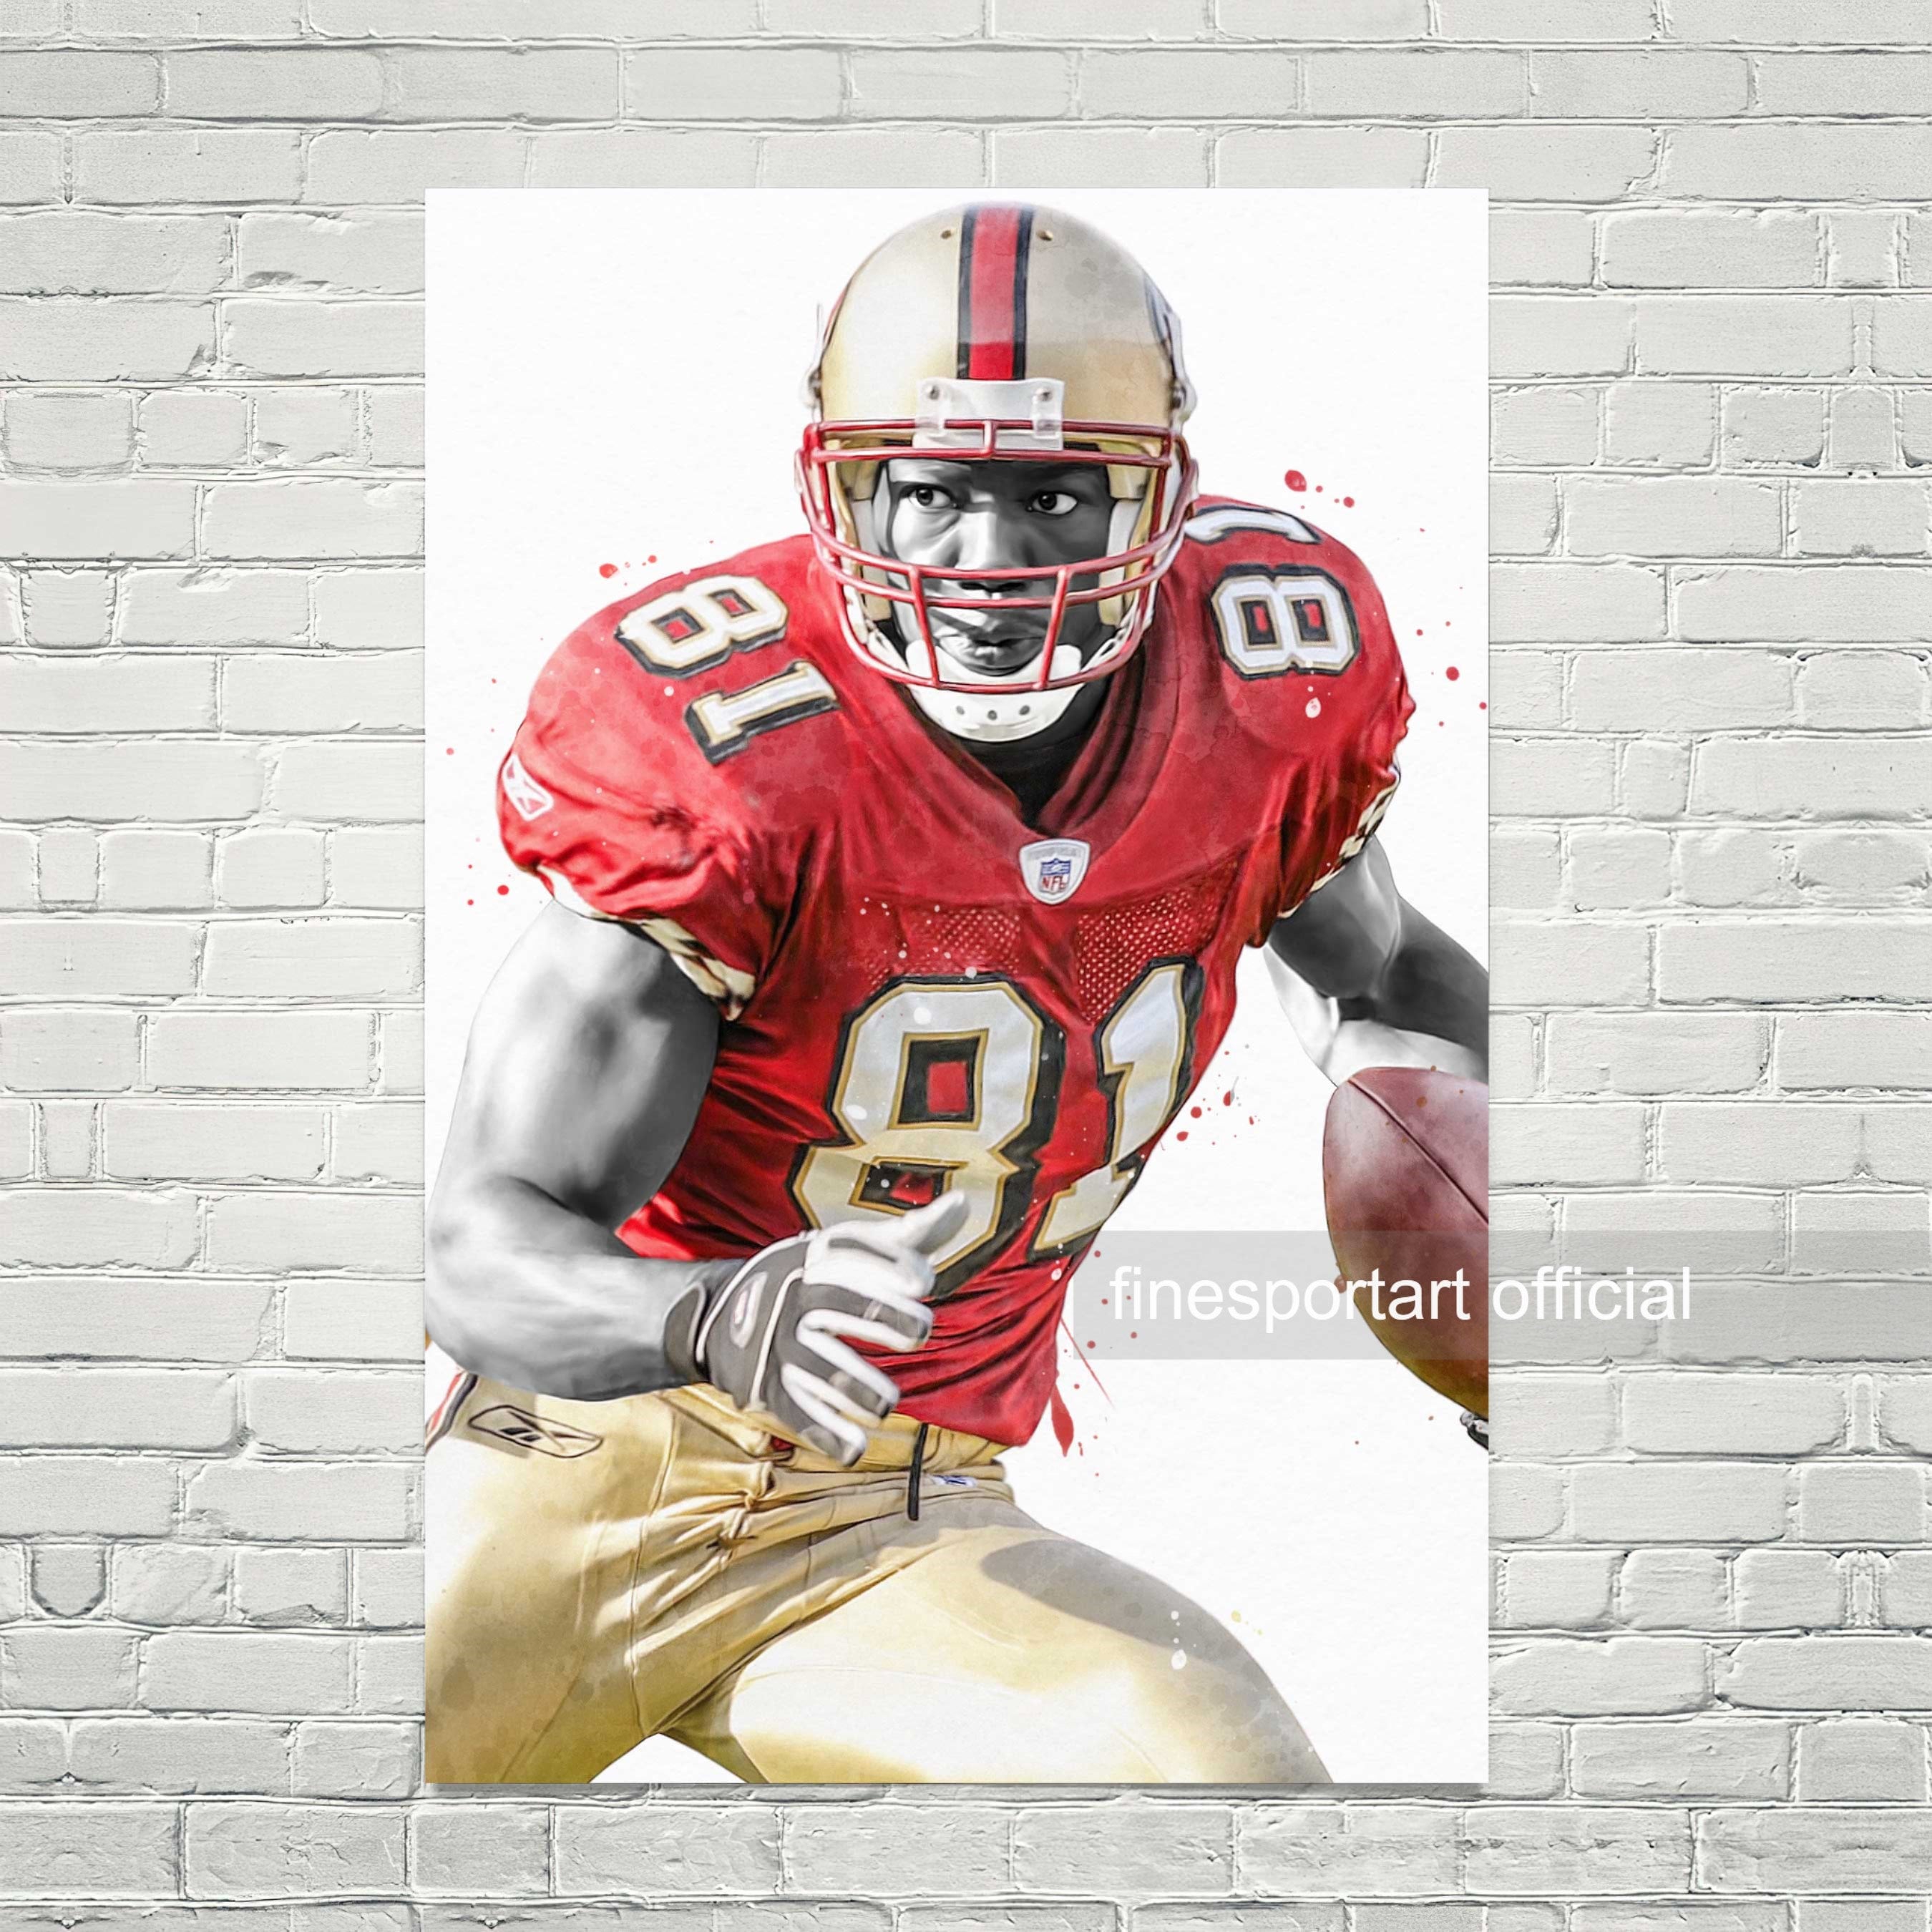 Terrell Owens Celebration - Terrell Owens - Posters and Art Prints